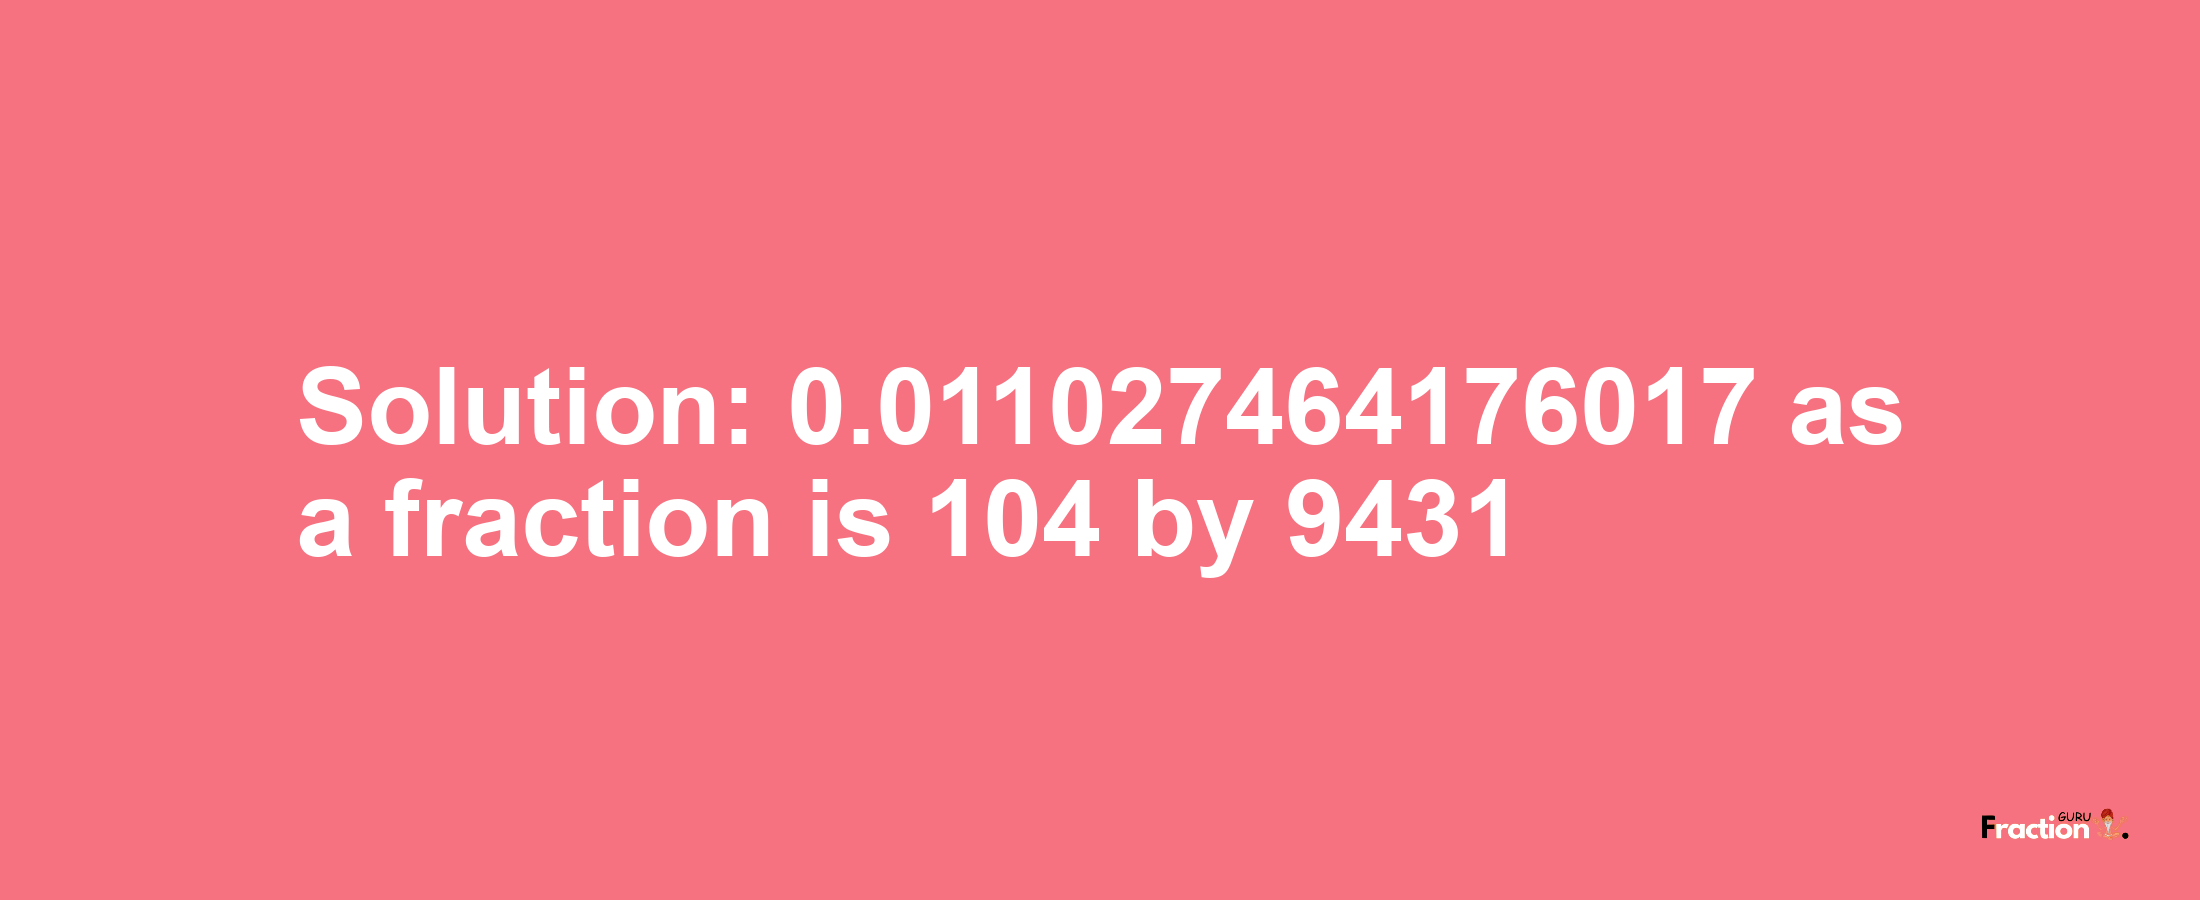 Solution:0.011027464176017 as a fraction is 104/9431